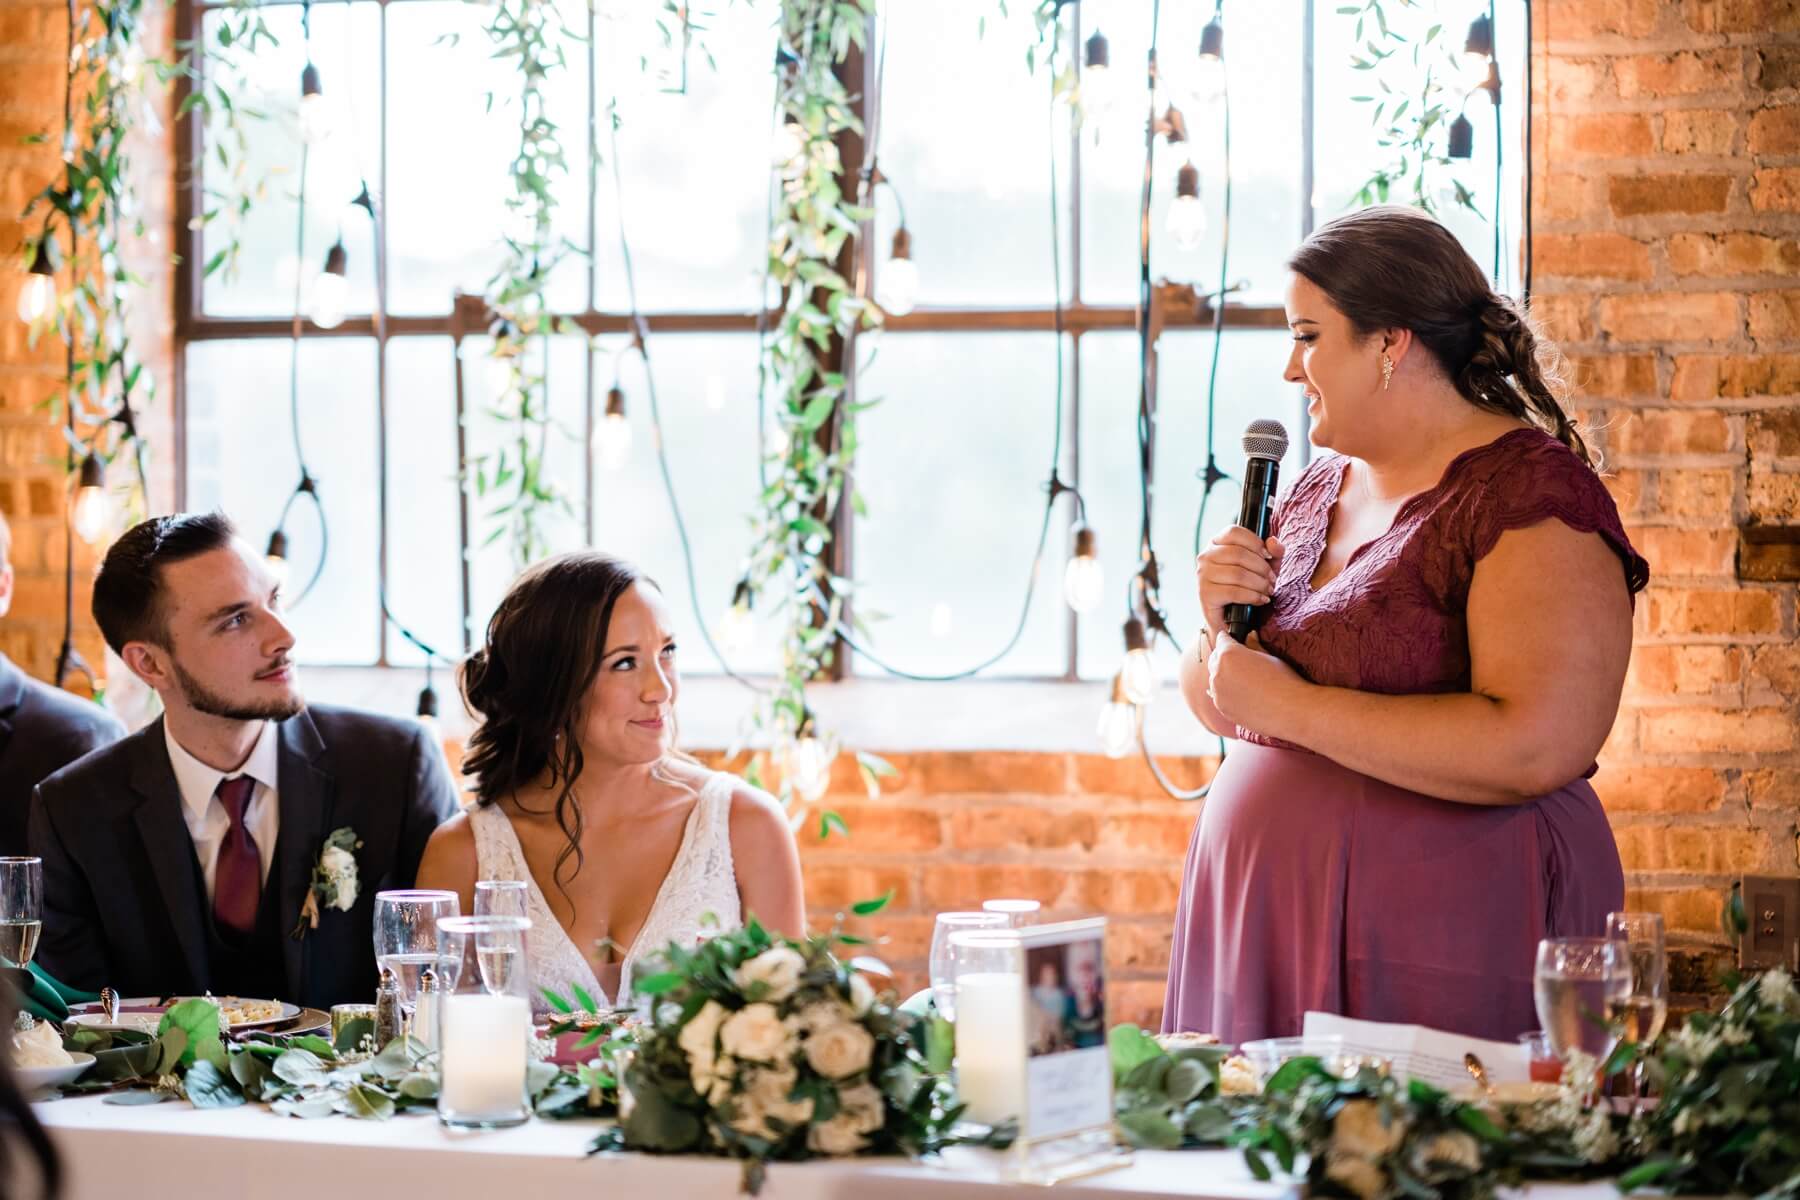 Maid of honor giving speech at wedding reception